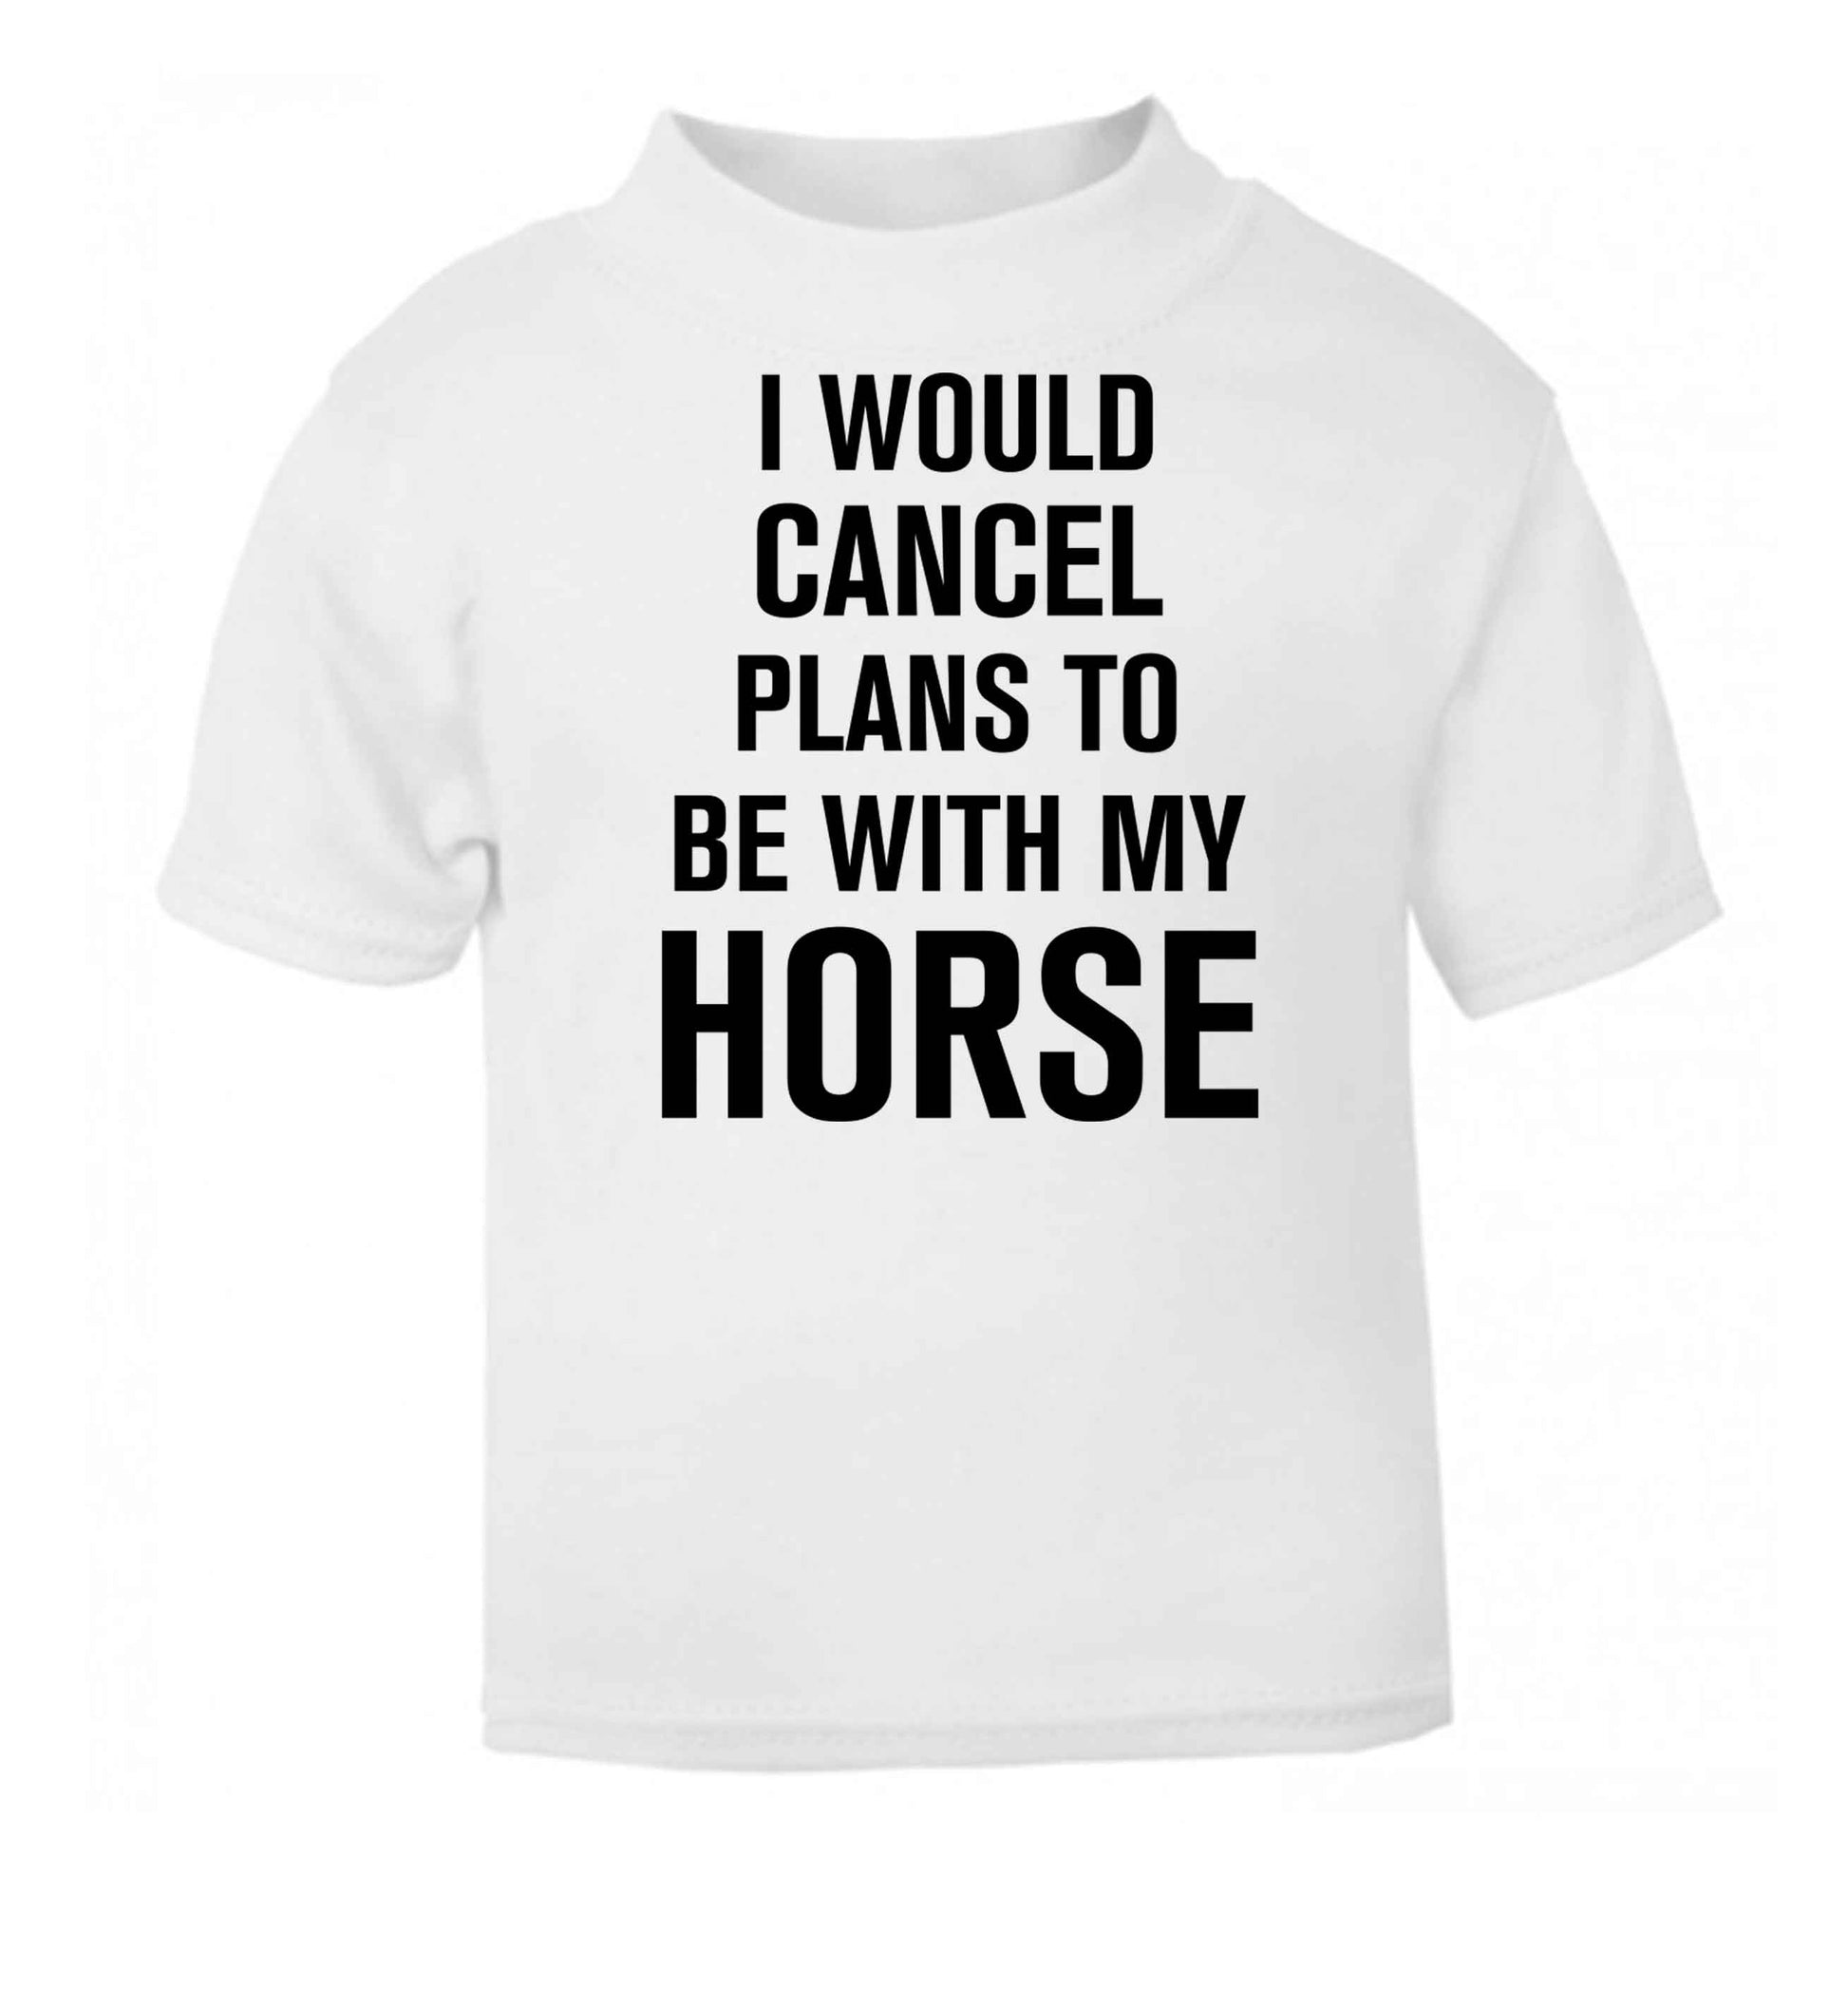 I will cancel plans to be with my horse white baby toddler Tshirt 2 Years